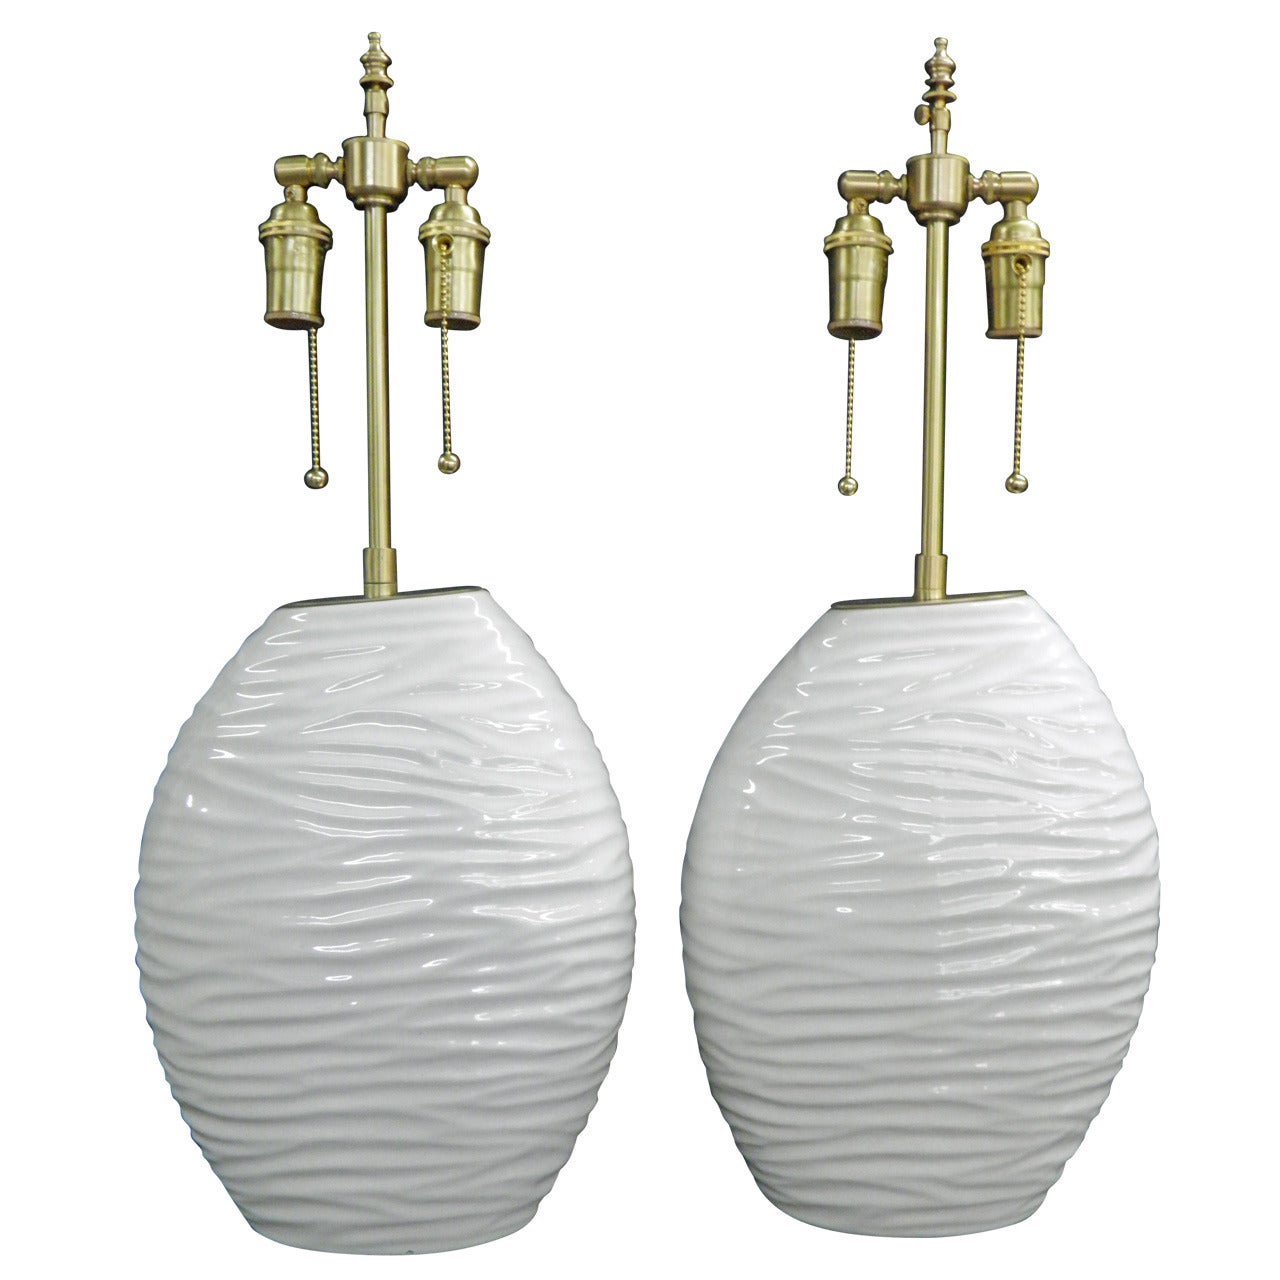 Pair of "Ripple" Textured Ceramic Vessels with Lamp Application